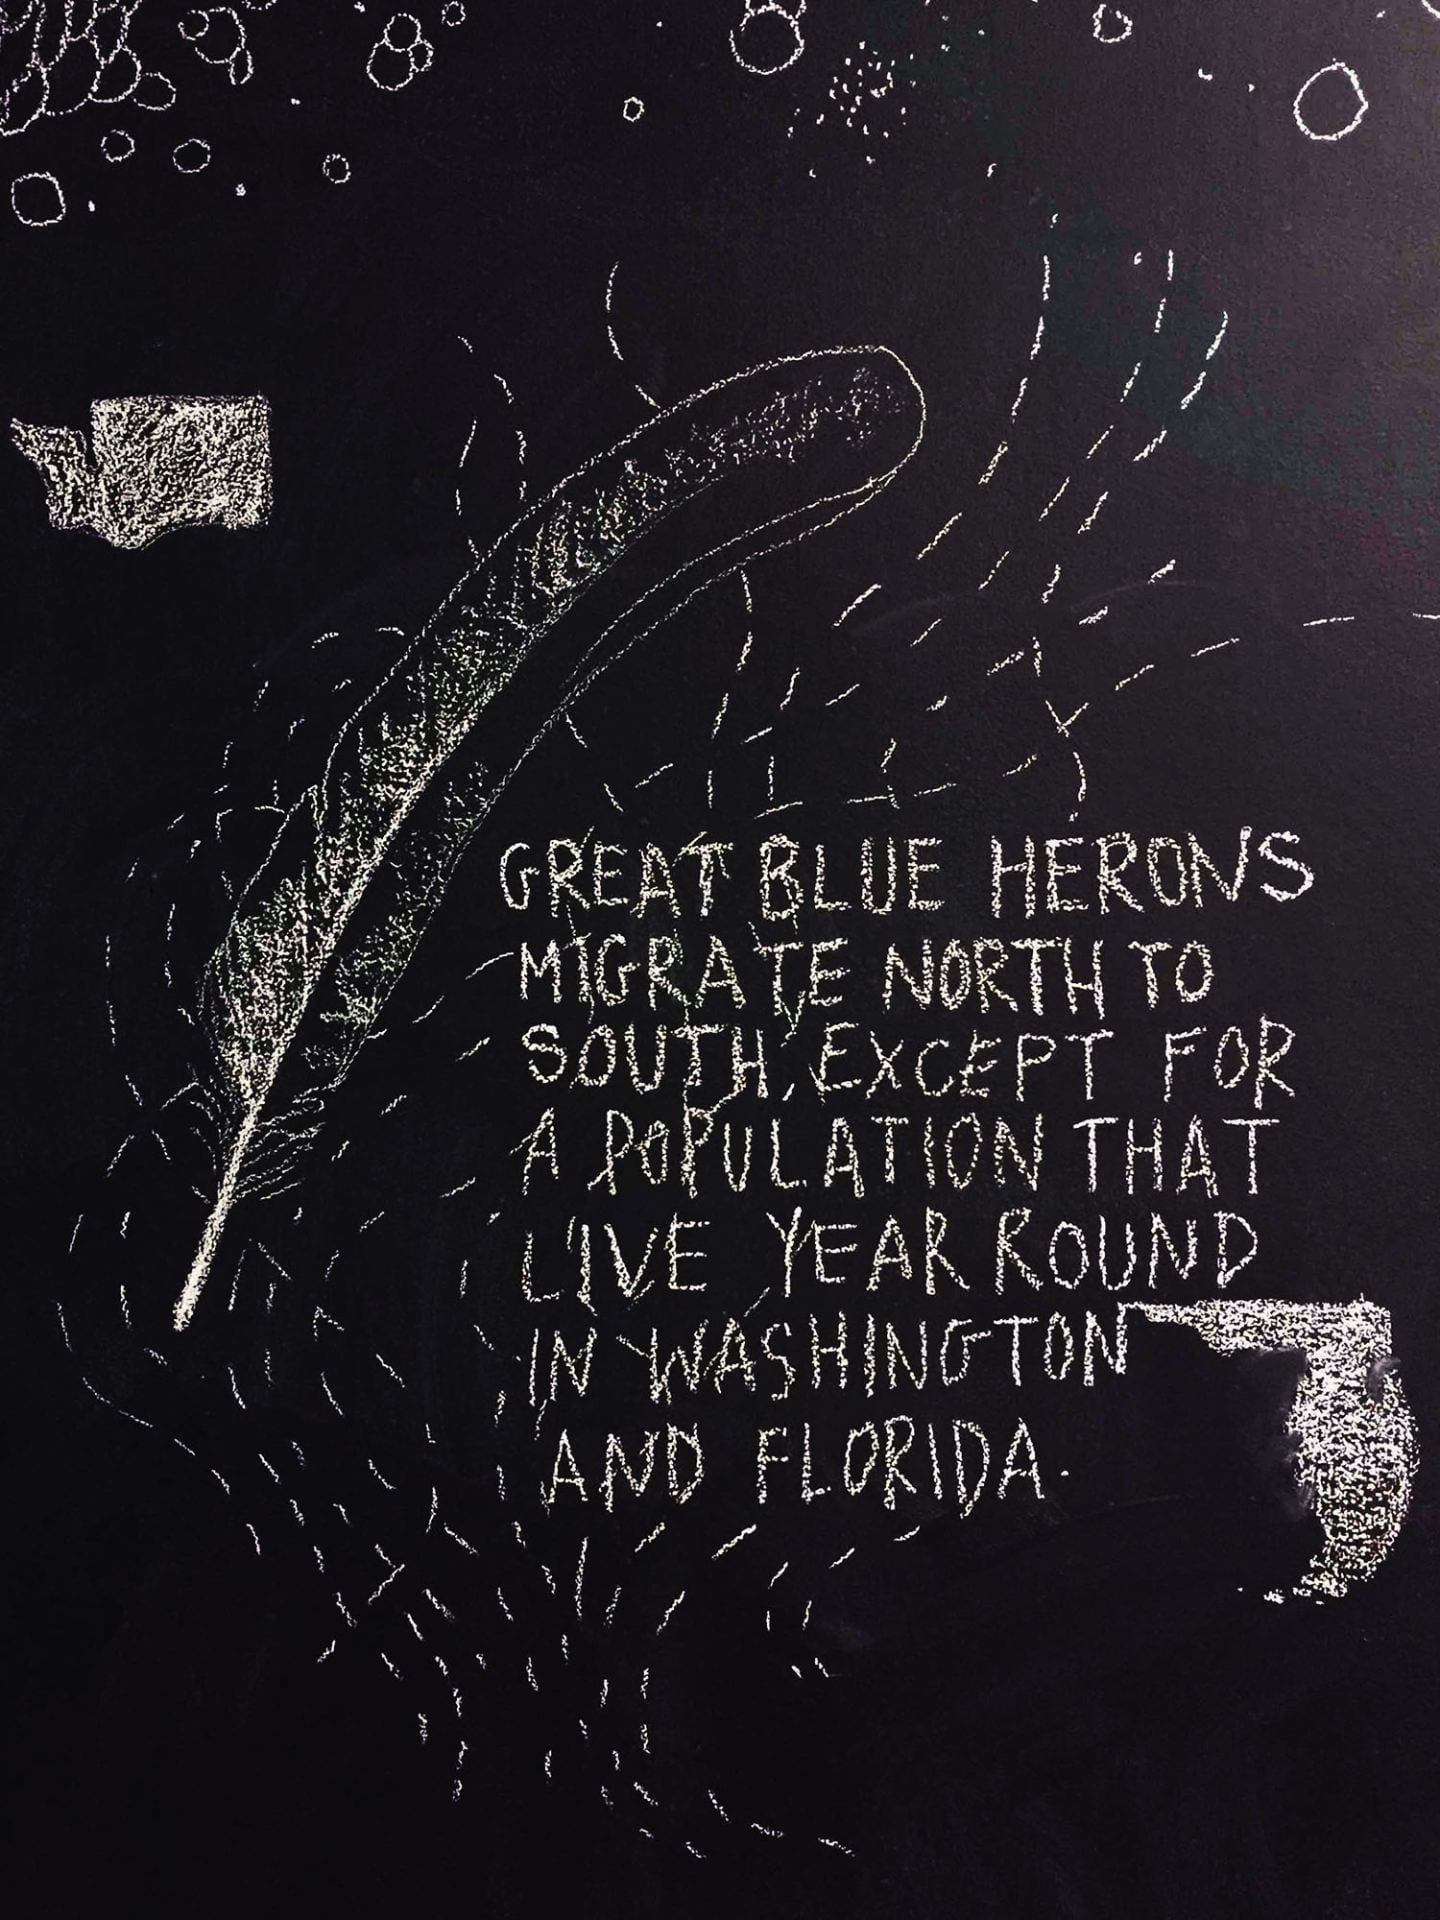 labeled illustration of a feather: "Great blue herons migrate north to south, except for a population that live year round in Washington and Florida"